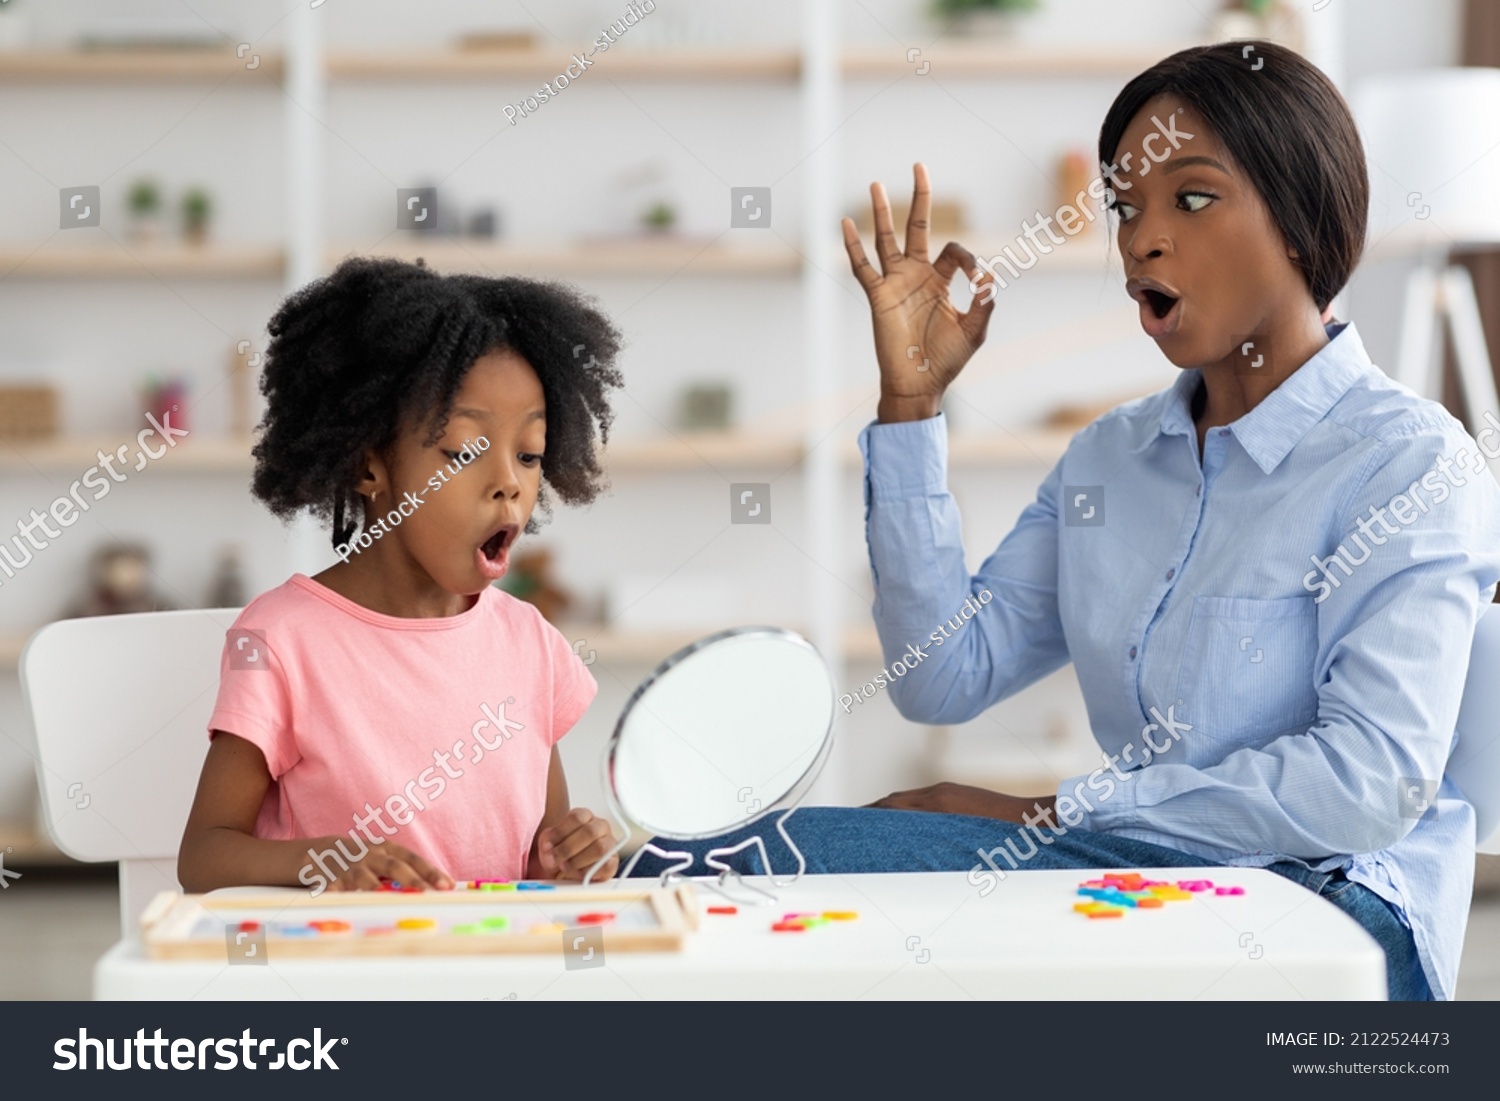 Pretty little black girl attending speech therapy session at clinic, looking at mirror, beautiful young african american woman speech-language pathologist working on sounds with kid, articulating #2122524473